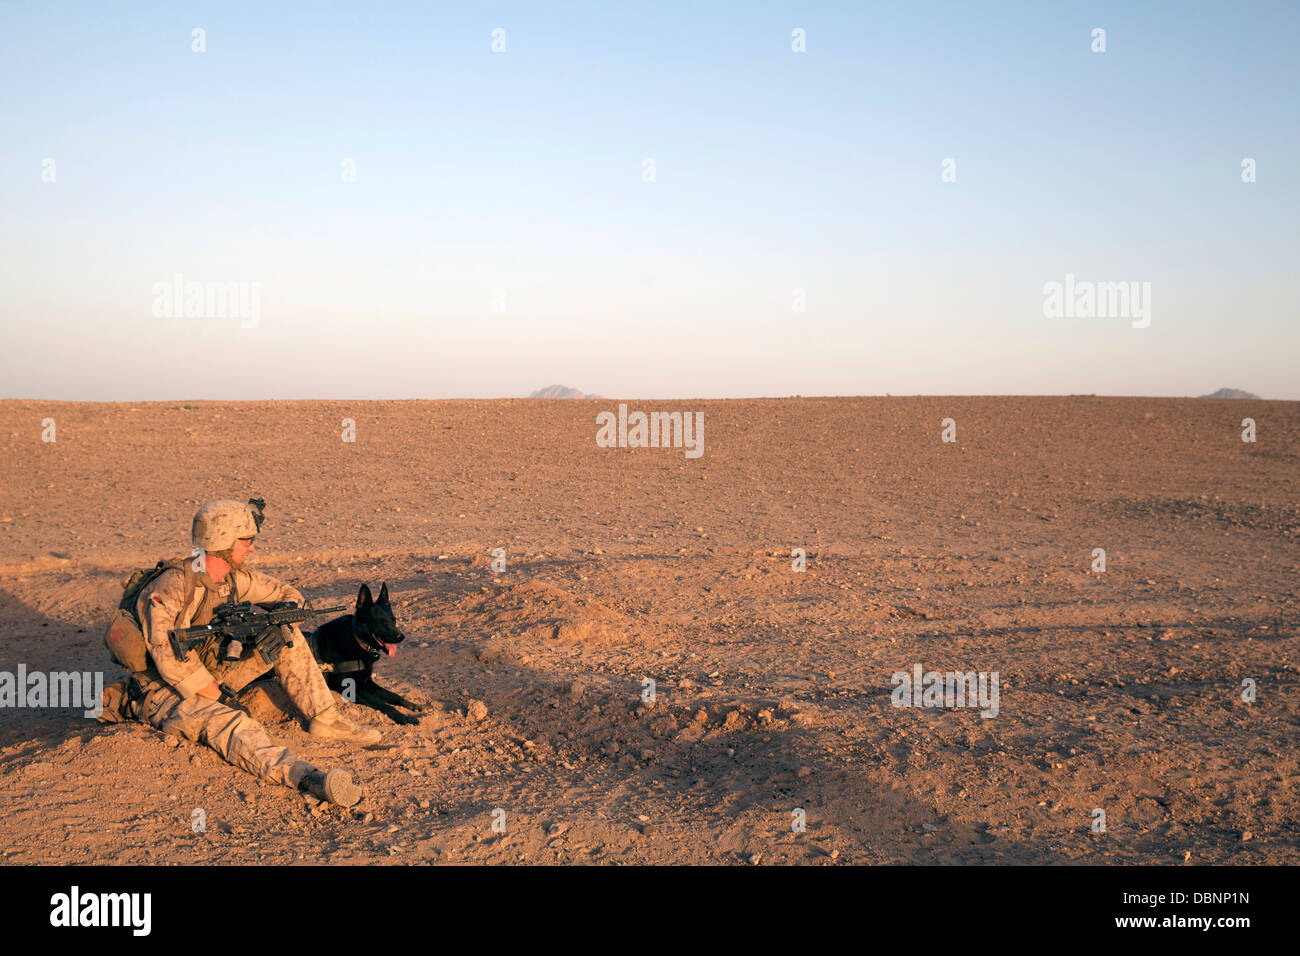 US Marine Corps Cpl. Adam Cook rests with his working dog, Falco, during a patrol July 23, 2013 in Mohammad Abad, Helmand province, Afghanistan. Stock Photo